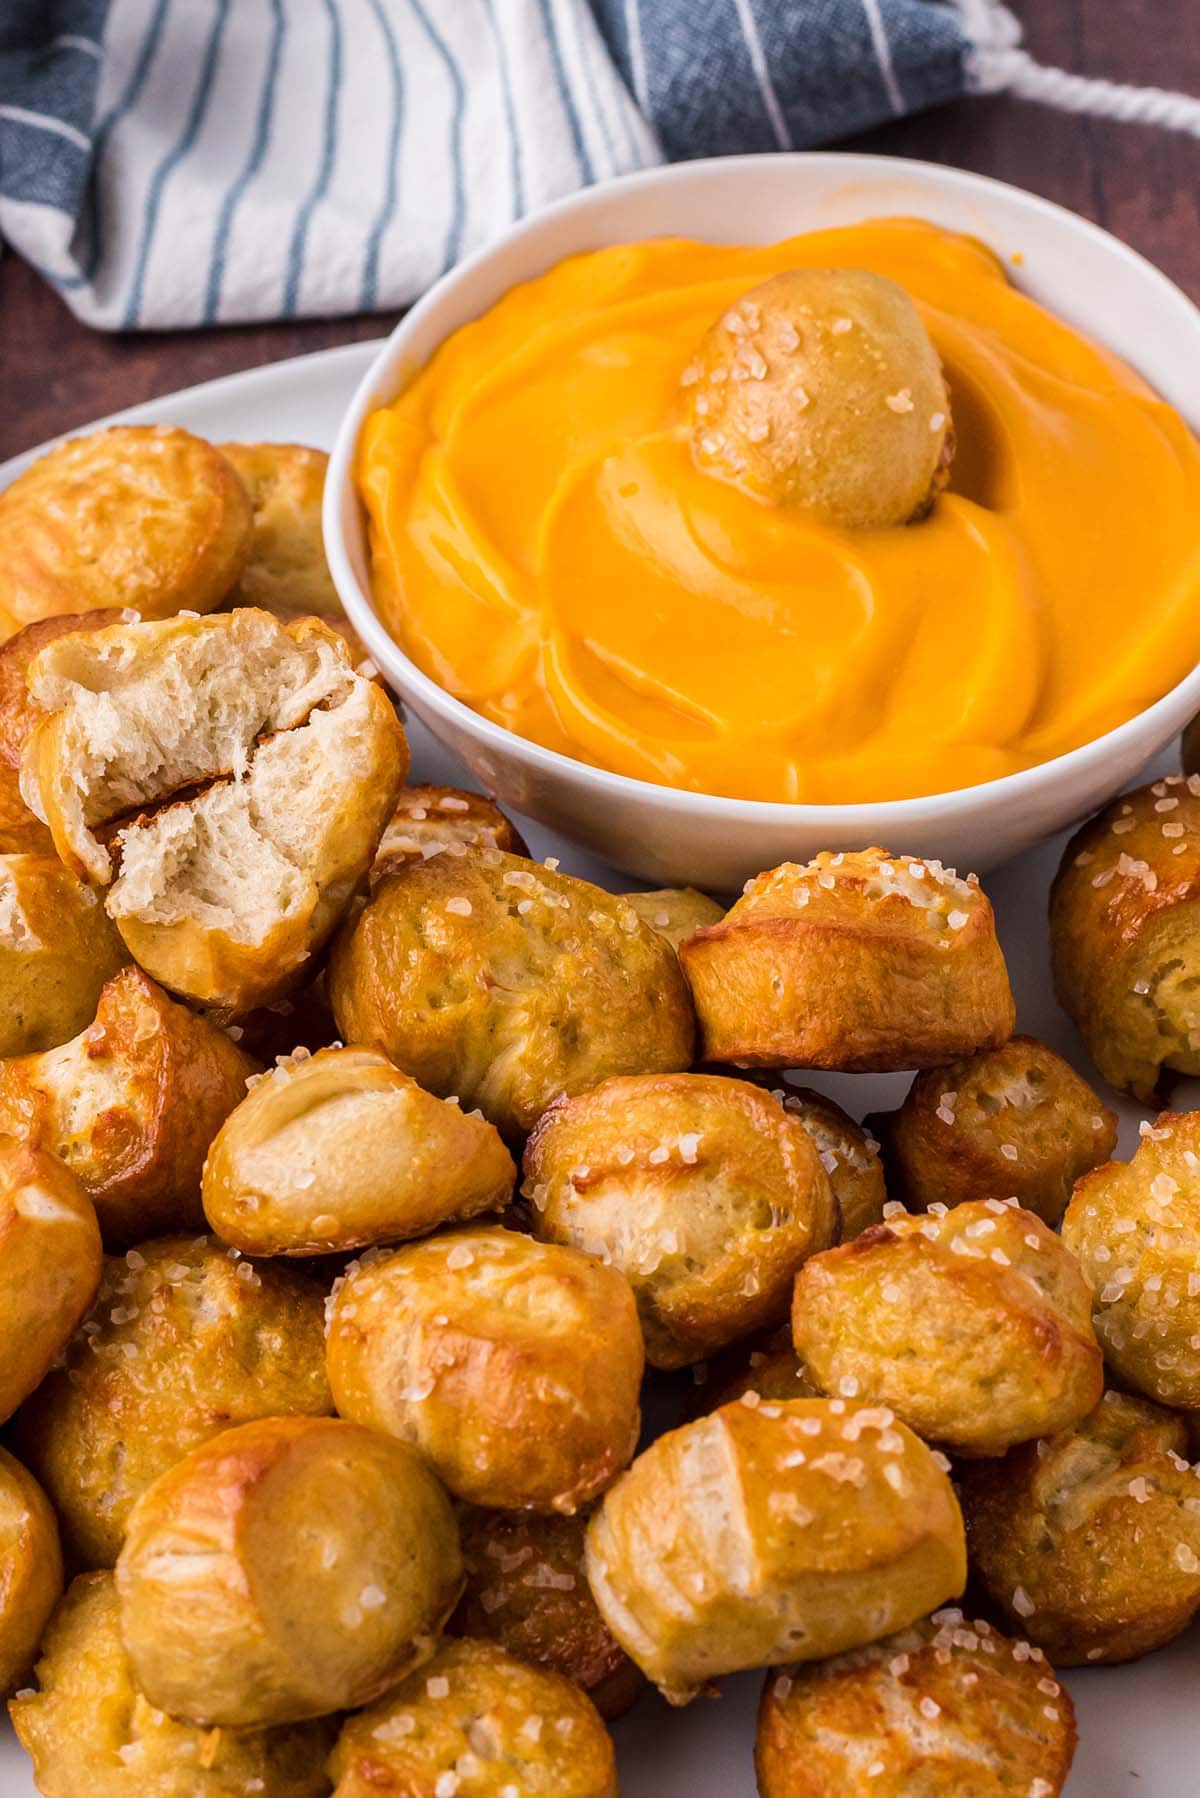 Soft Pretzel Bites dipped in cheese sauce.